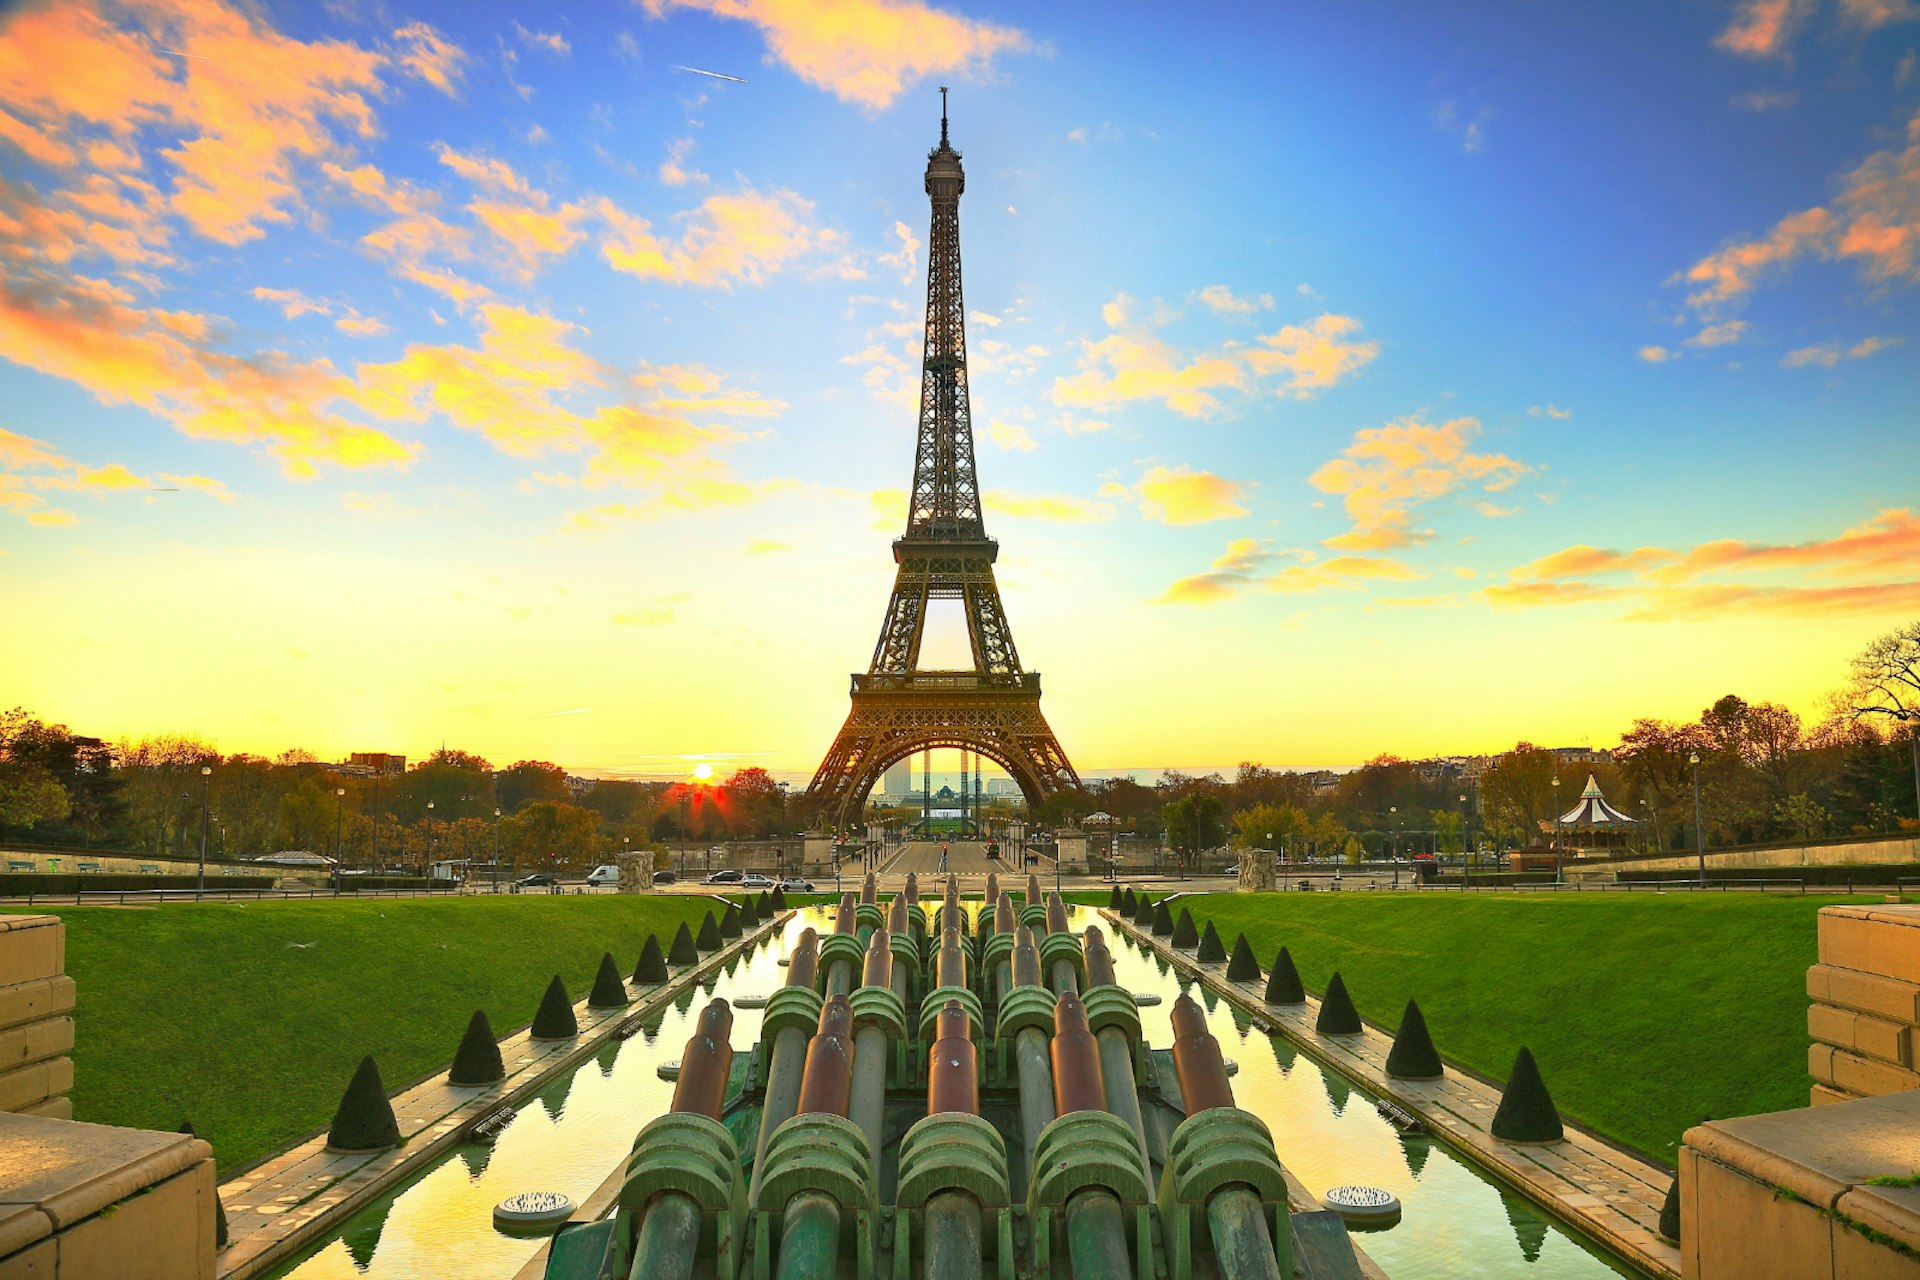 The sun rises behind the Eiffel Tower, turning the sky yellow, blue and orange. The photo is taken from behind a sculpture that is flanked by water and green lawns